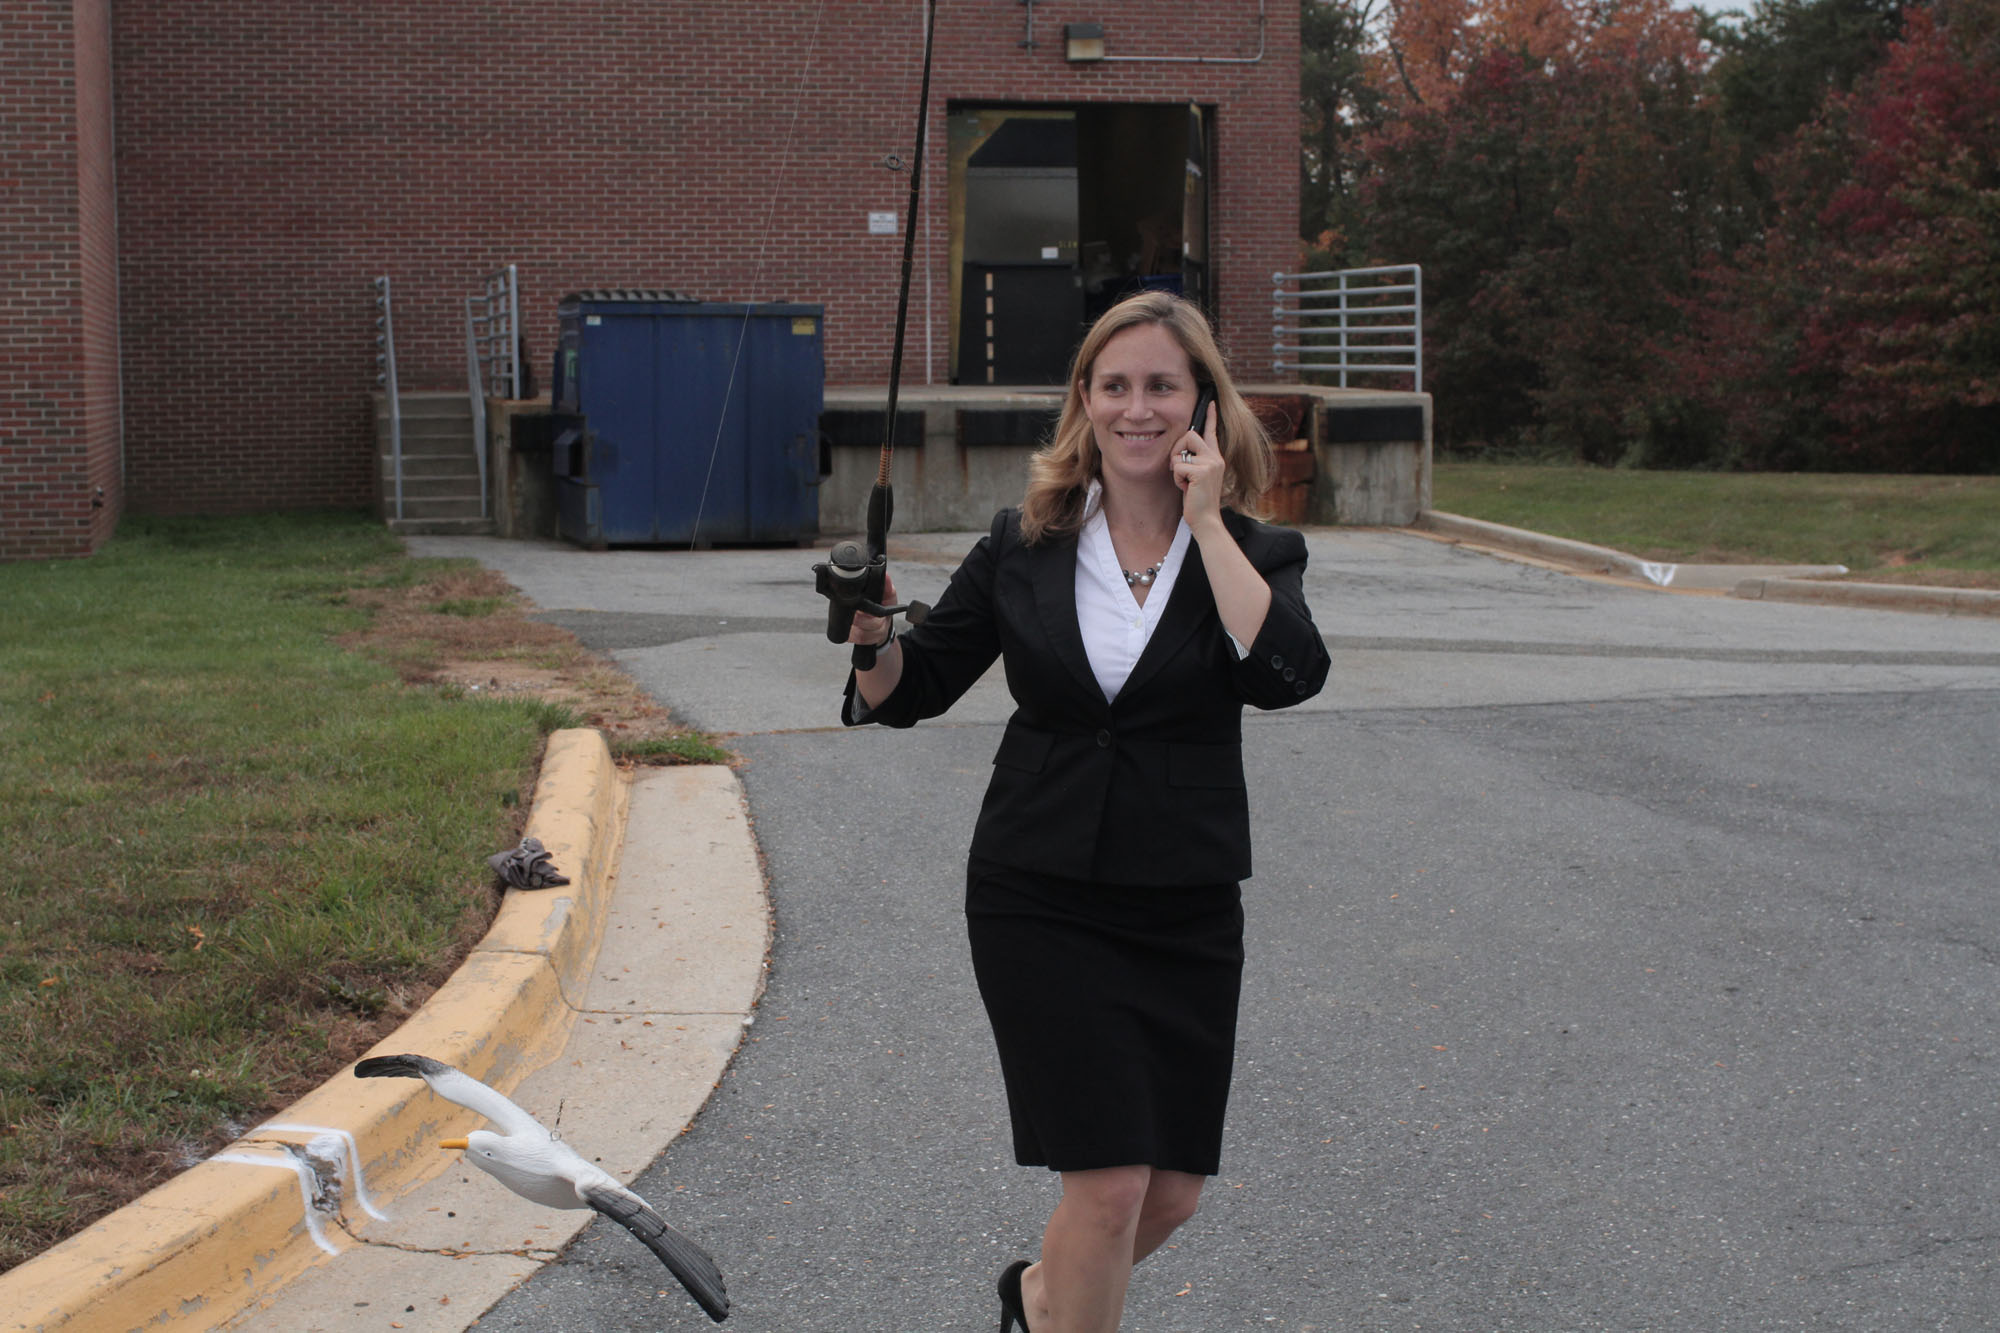 GPM Application Scientist Dr. Dalia Kirschbaum prepares for her role as "Busy businesswoman".